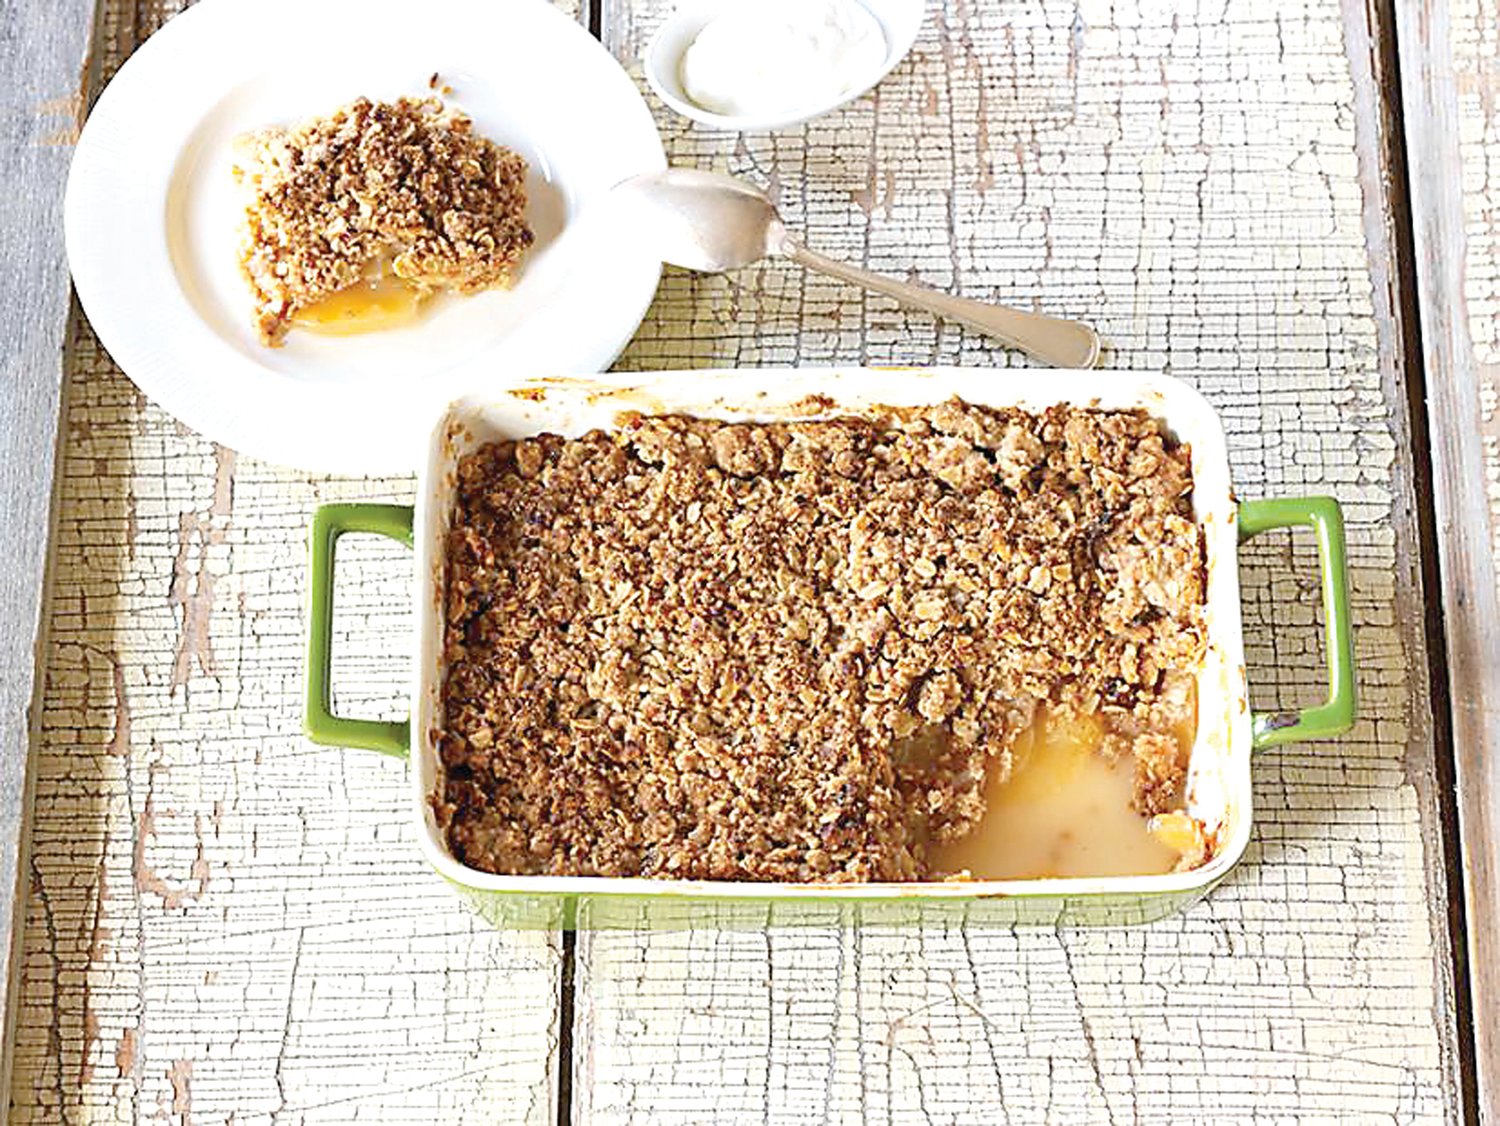 Apple crisp is the easiest way to make a seasonal dessert, whether for a family gathering or a weeknight dinner. The local apple season is at its peak right now, ensuring flavorful crisps. Photograph by Foodnetwork.com